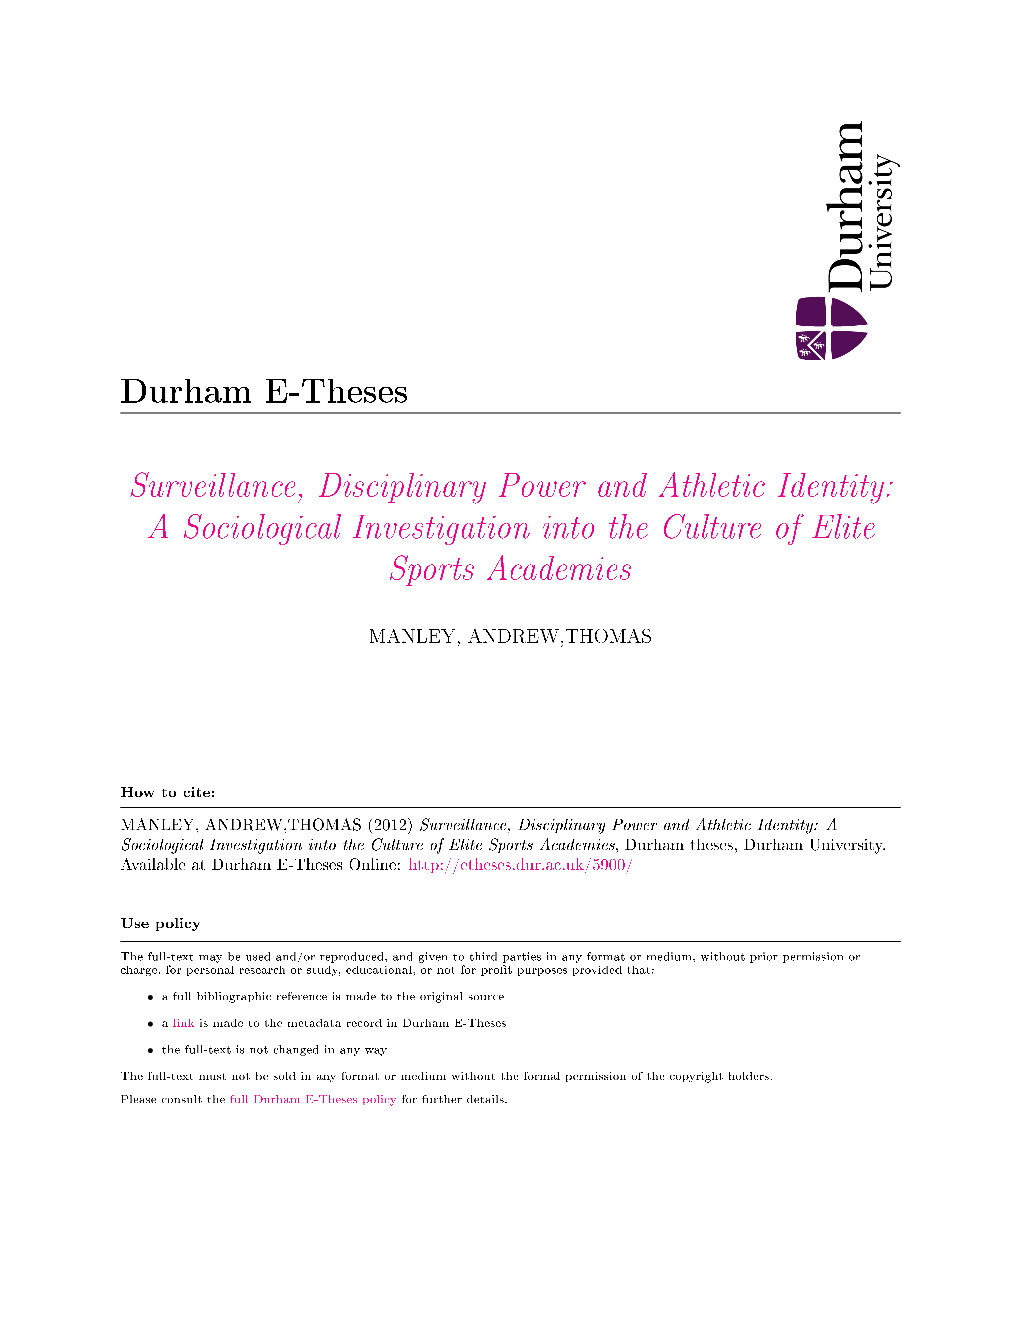 Surveillance, Disciplinary Power and Athletic Identity: a Sociological Investigation Into the Culture of Elite Sports Academies